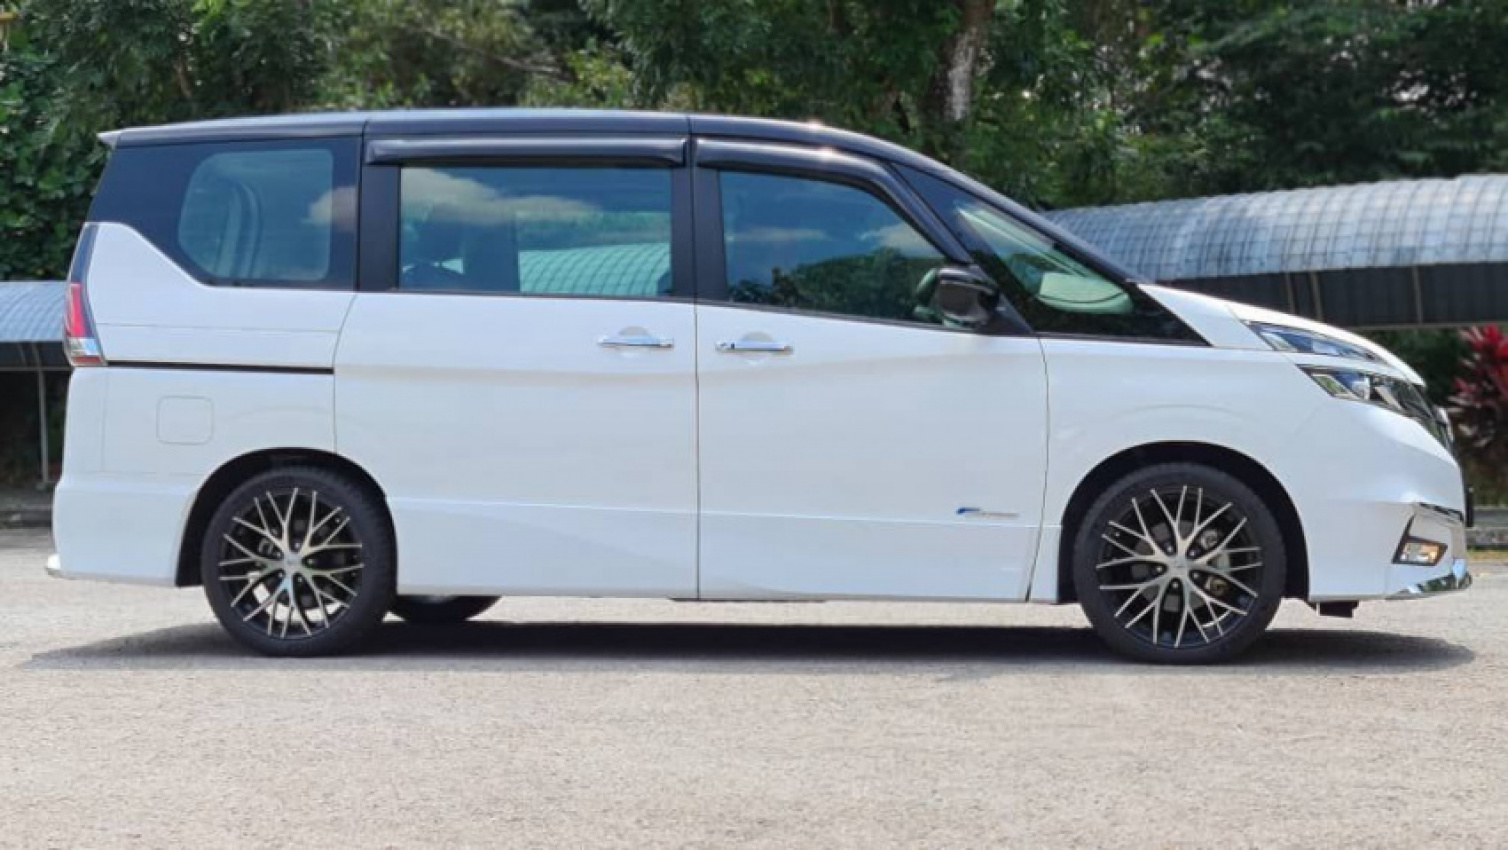 autos, cars, nissan, reviews, nissan serena, nissan serena j impul, nissan serena j impul premium highway star (two-tone colour) - it's all in the space